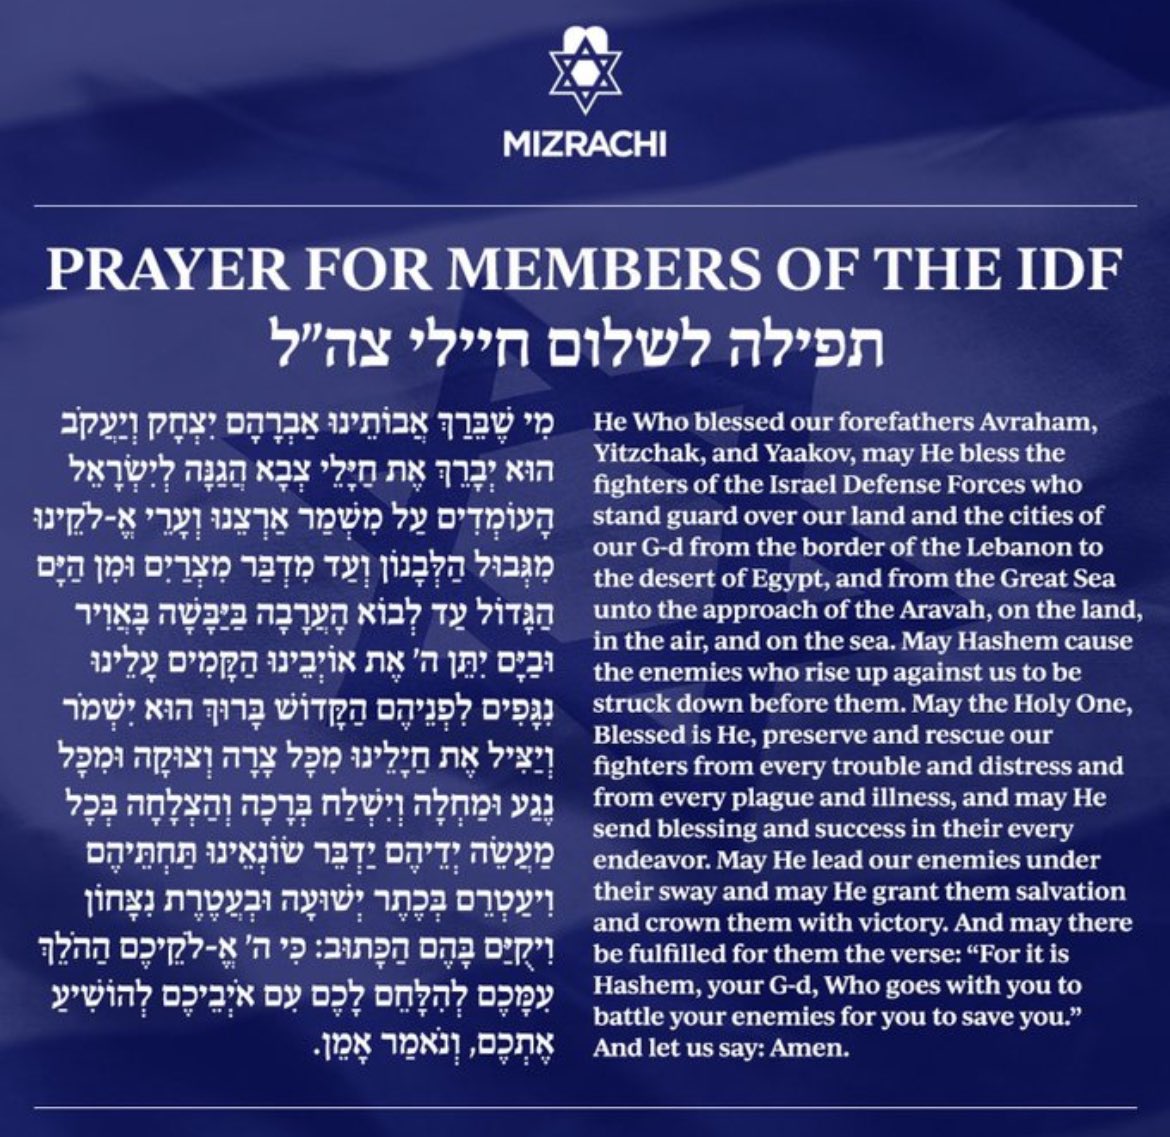 Please take a monent to pray for the fighters of the IDF. This is my personal request for you.💙🙏